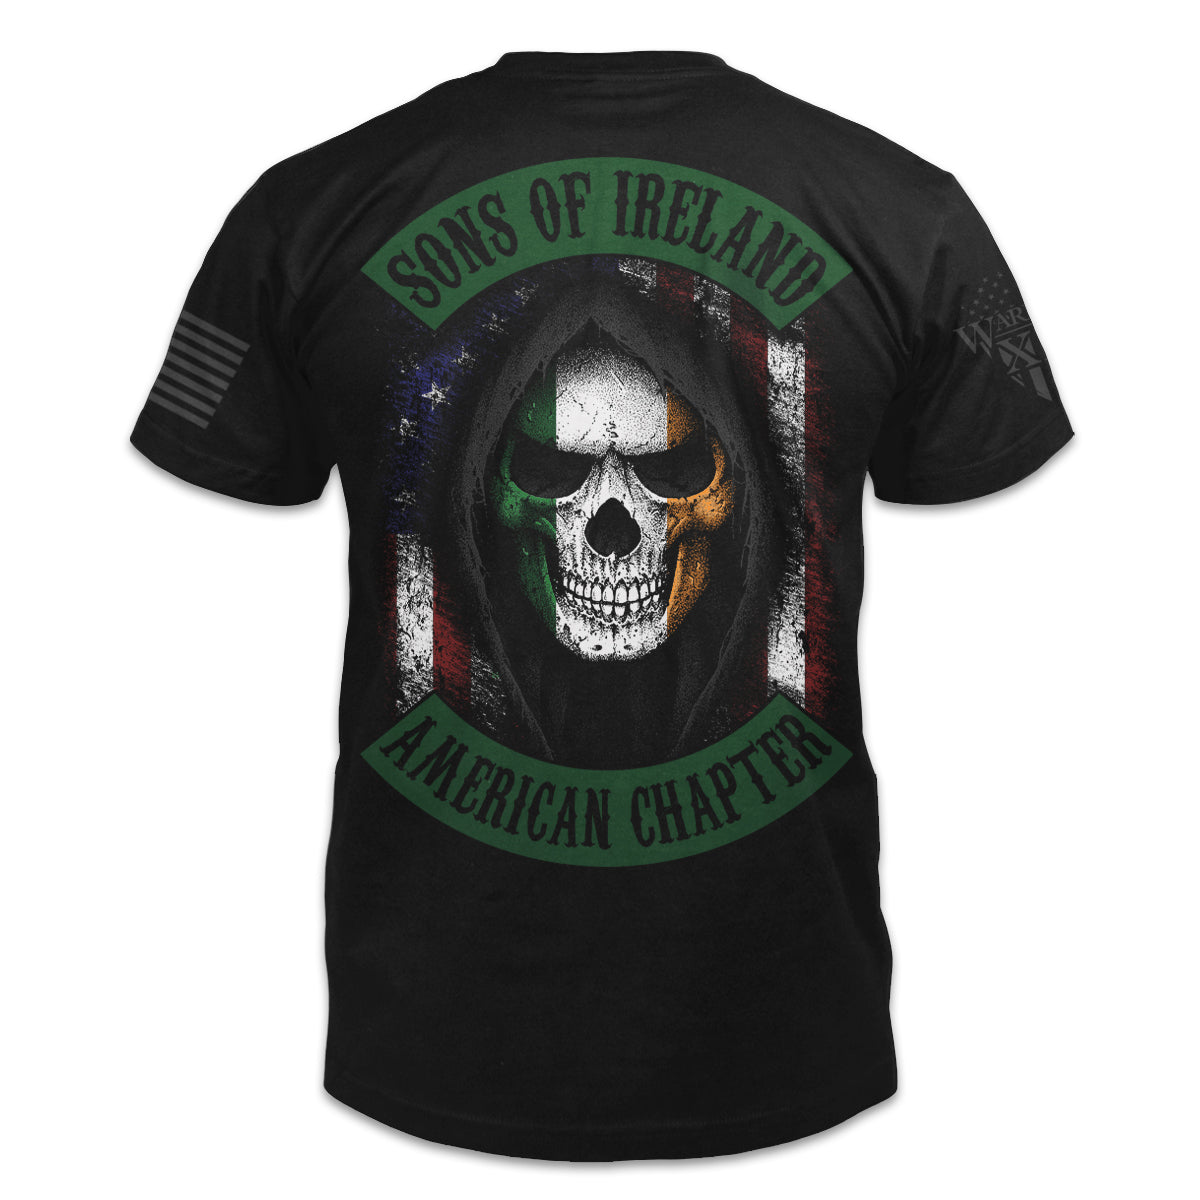 A black t-shirt with the words "Sons of Ireland - American Chapter" with a hooded irish skeleton with an American flag behind printed on the back of the shirt.